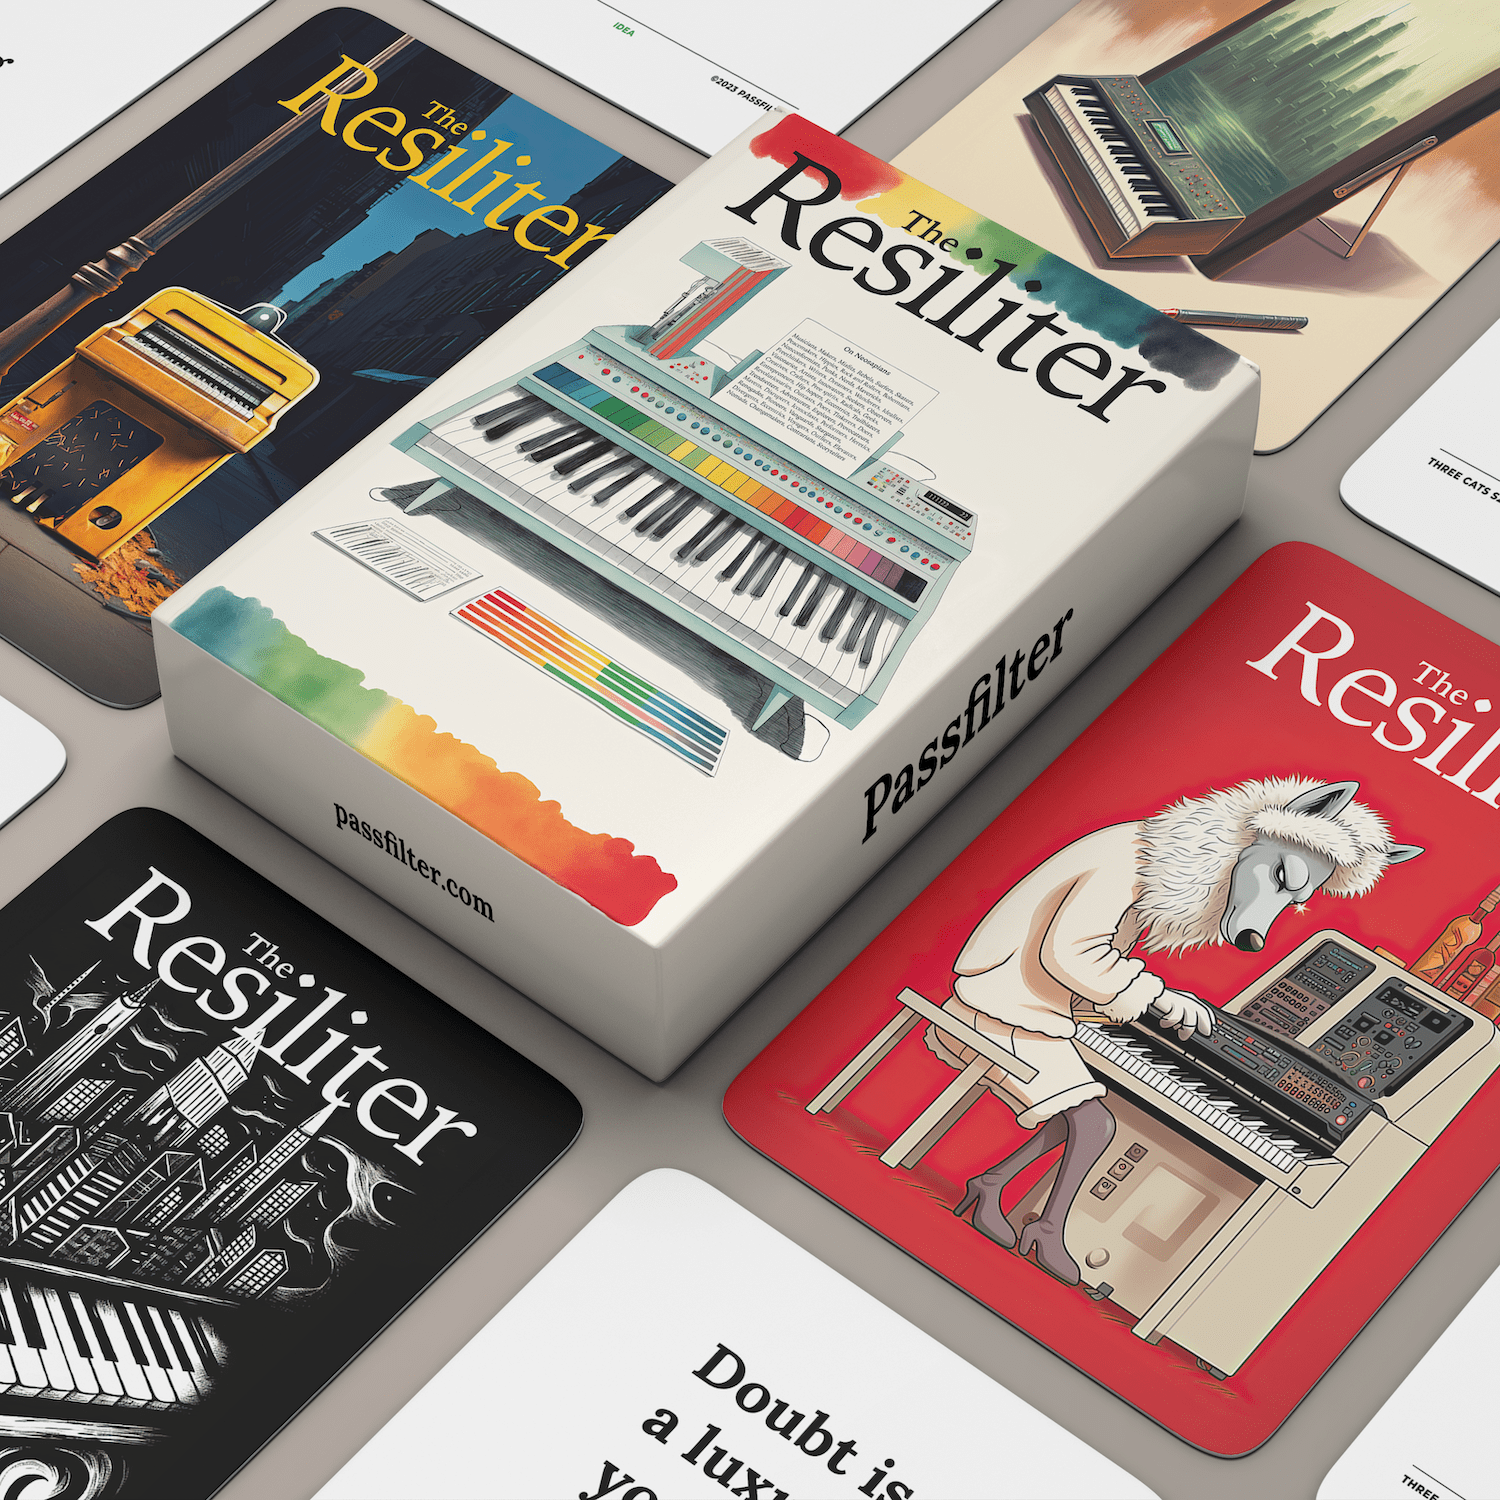 Passfilter cards with images of synthesizers on the cover of The Resiliter